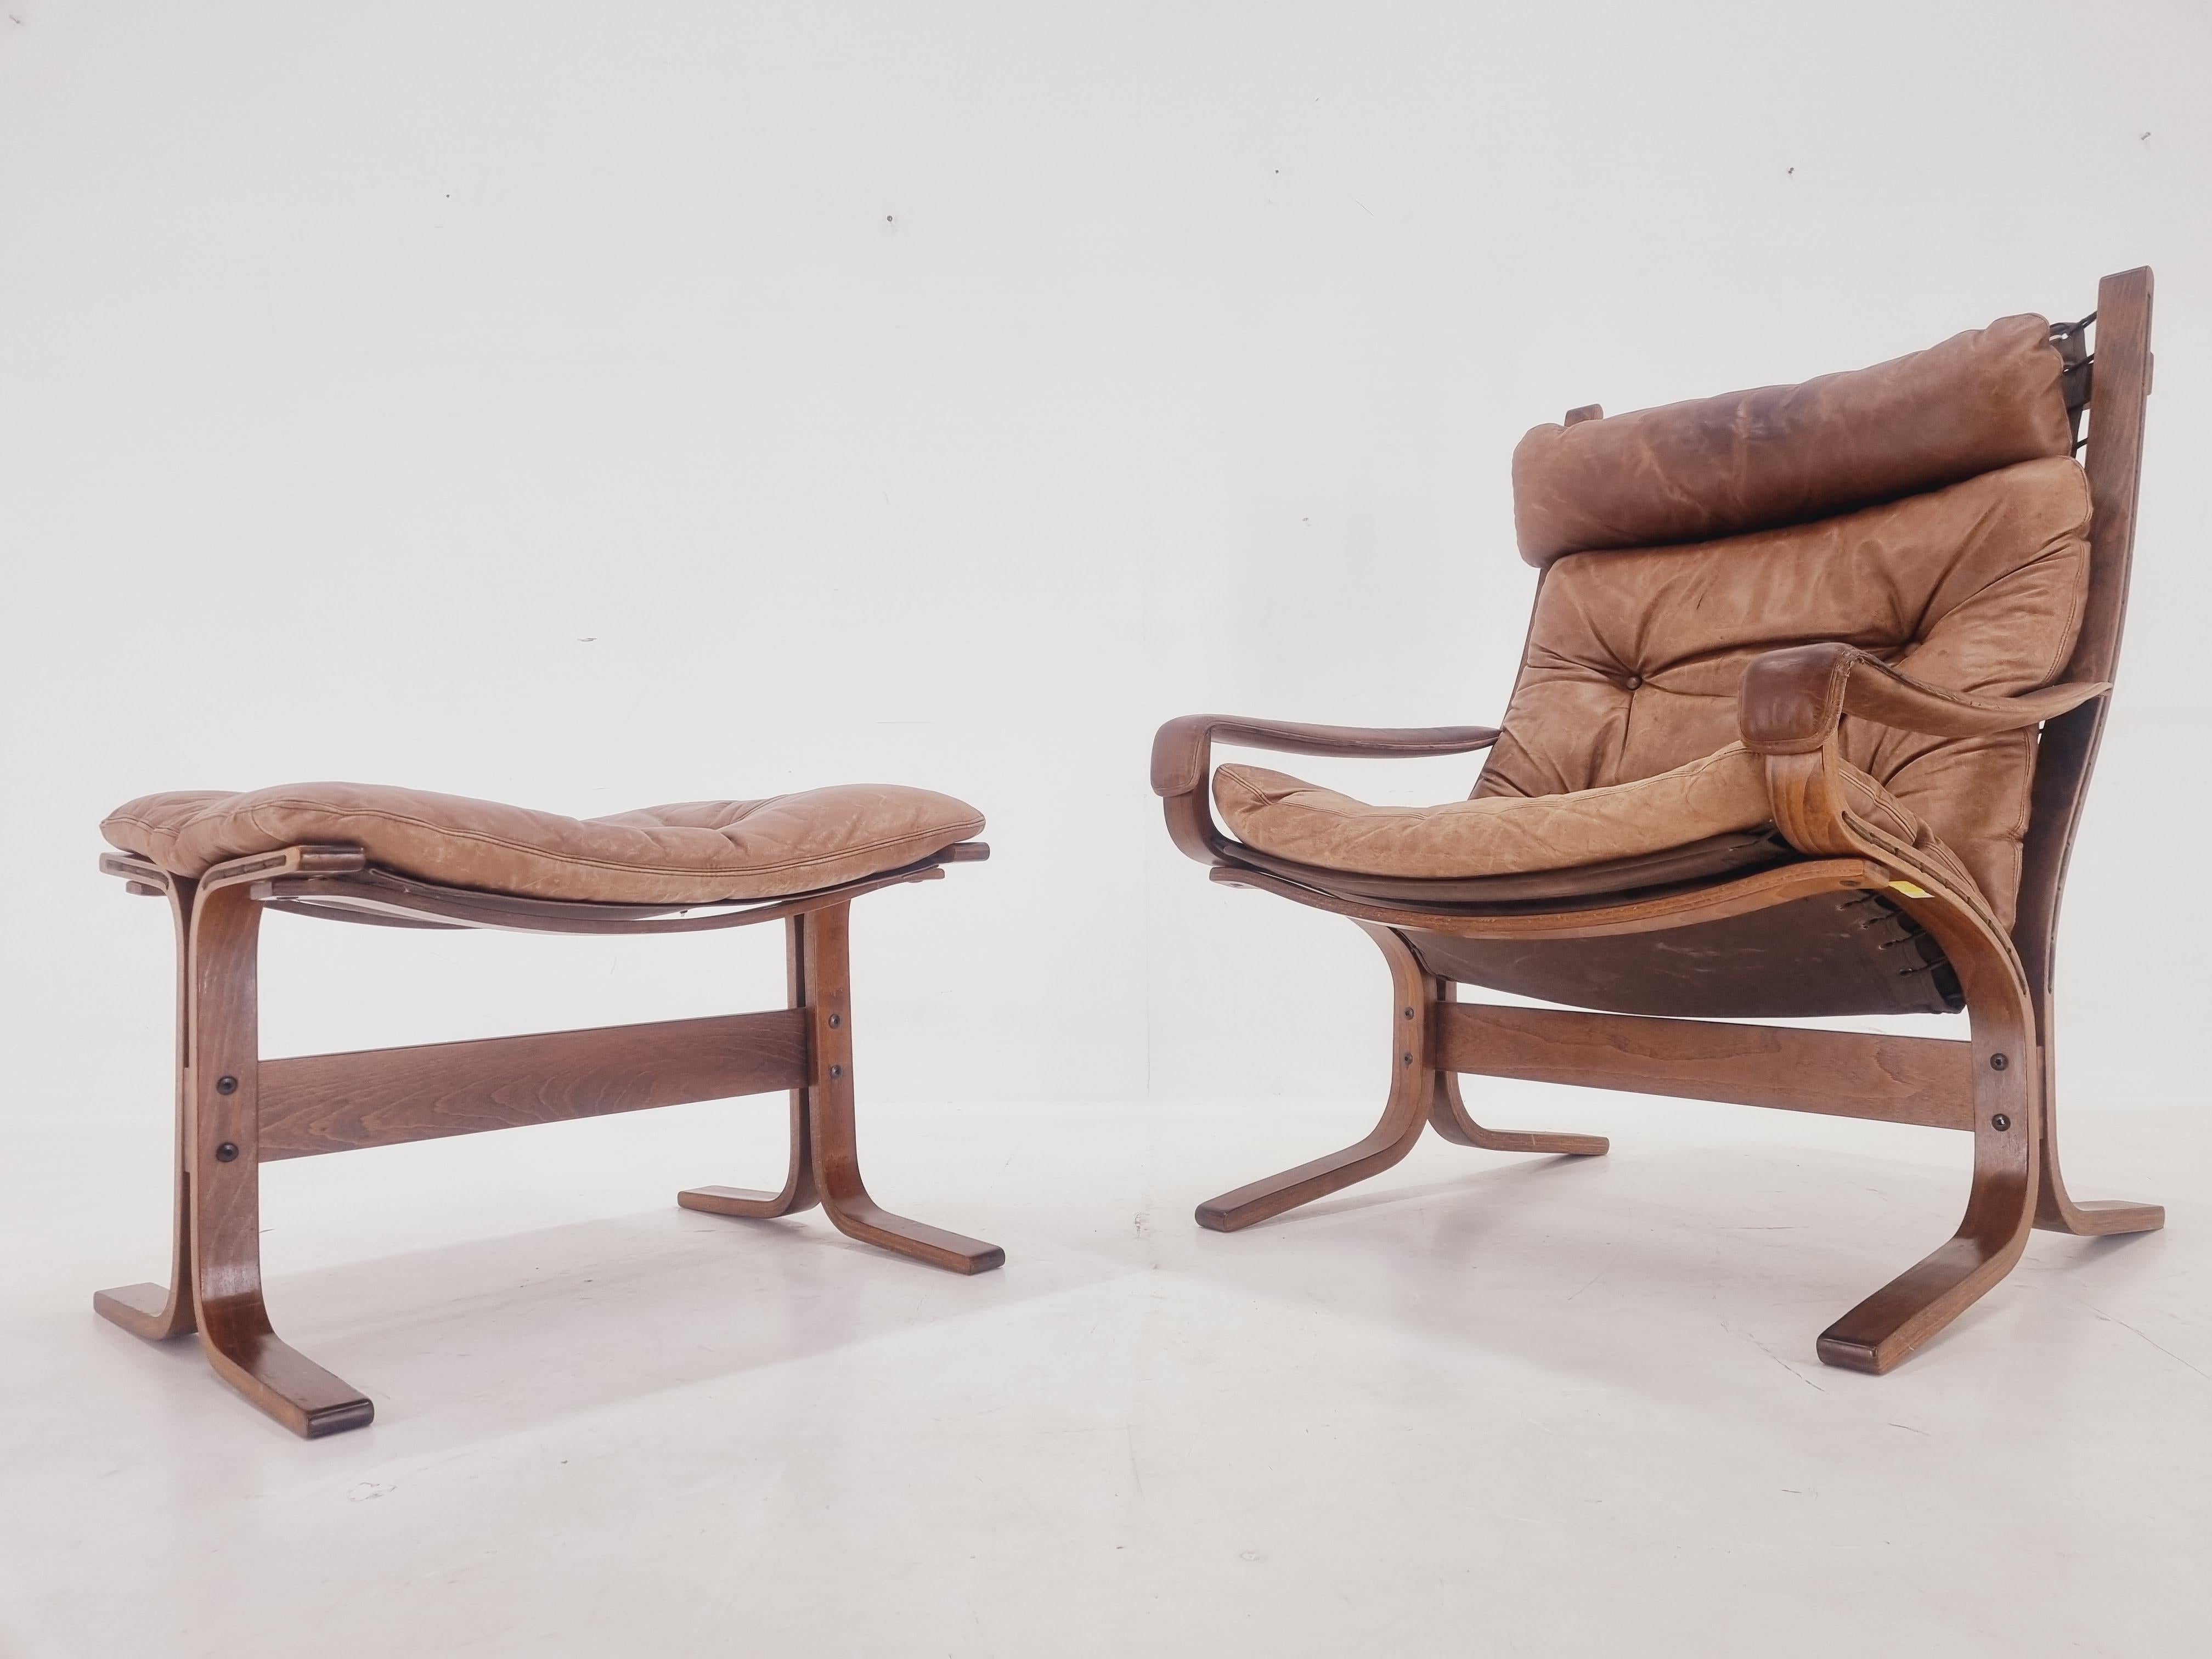 Midcentury Siesta Lounge Armchair and Footstool, Ingmar Relling, Westnofa, 1960s In Good Condition For Sale In Praha, CZ